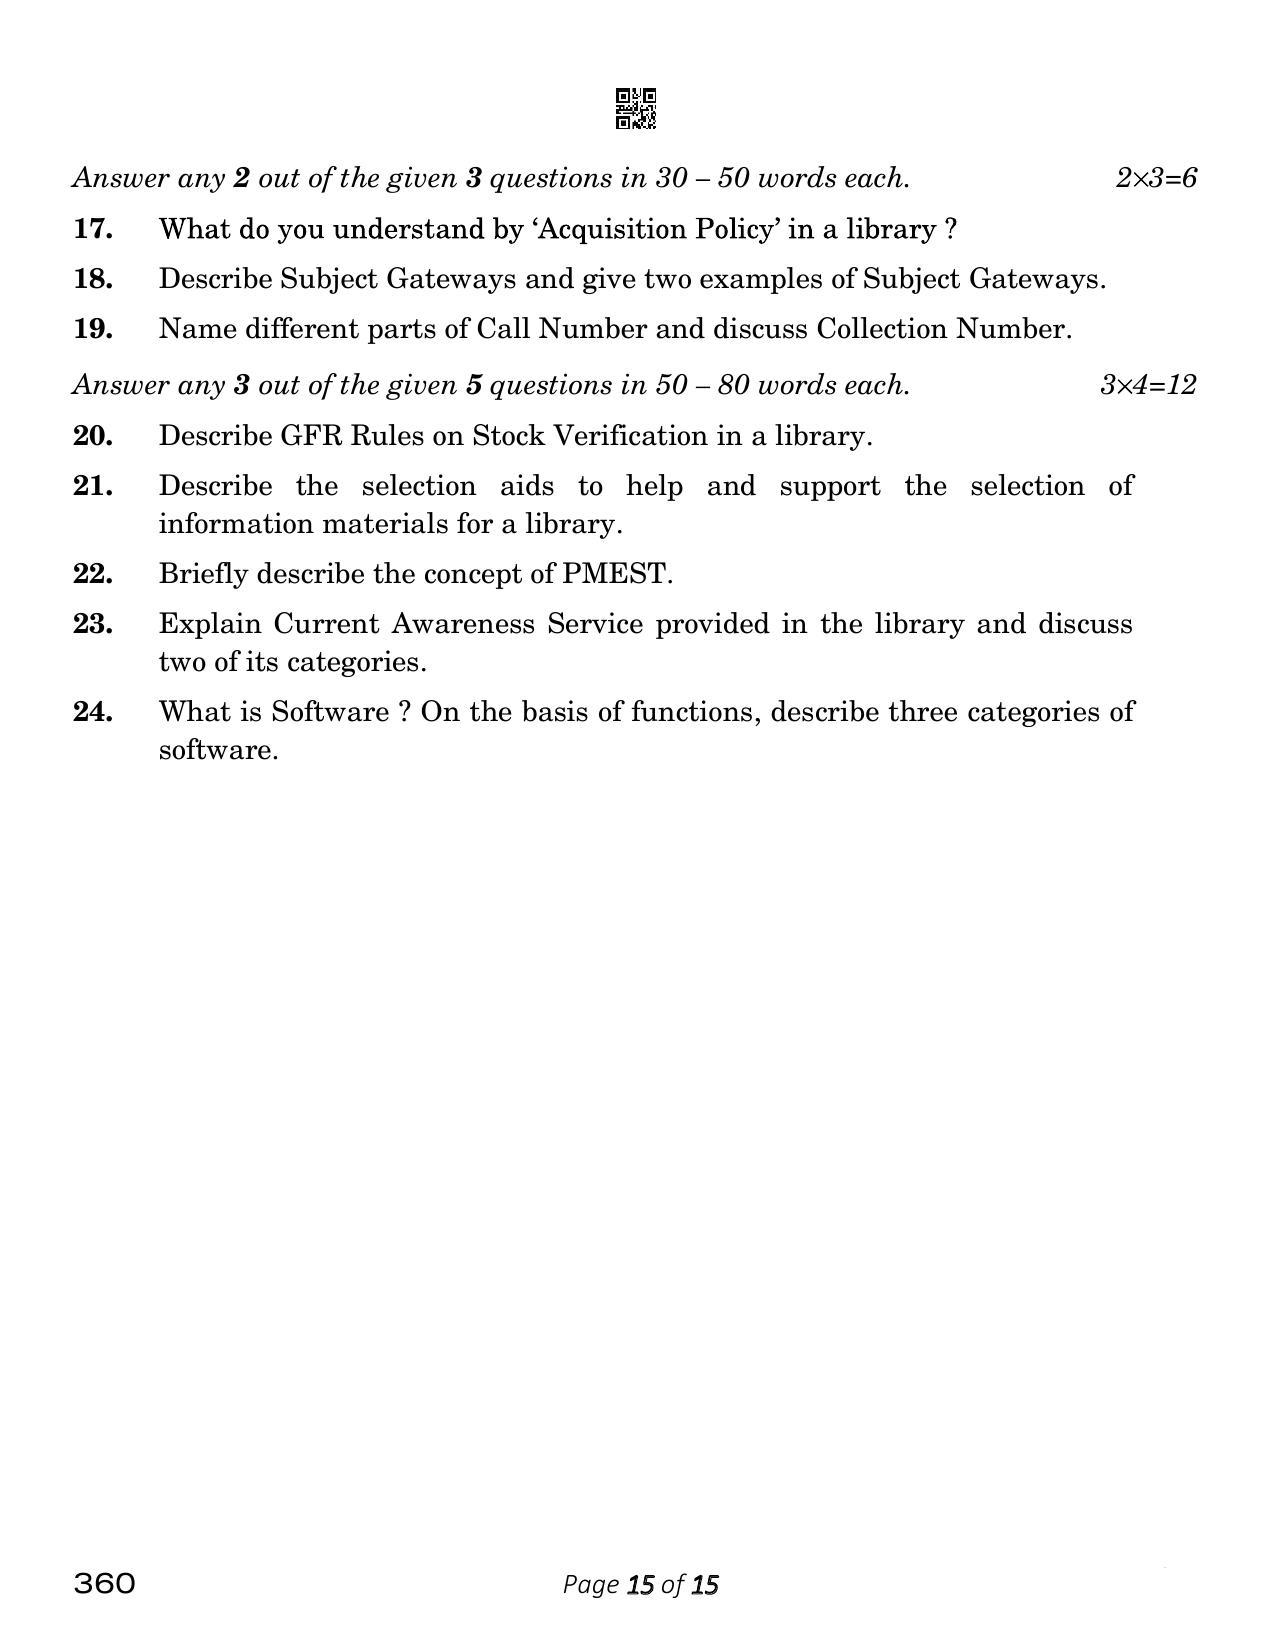 CBSE Class 12 Library And Information Science (Compartment) 2023 Question Paper - Page 15